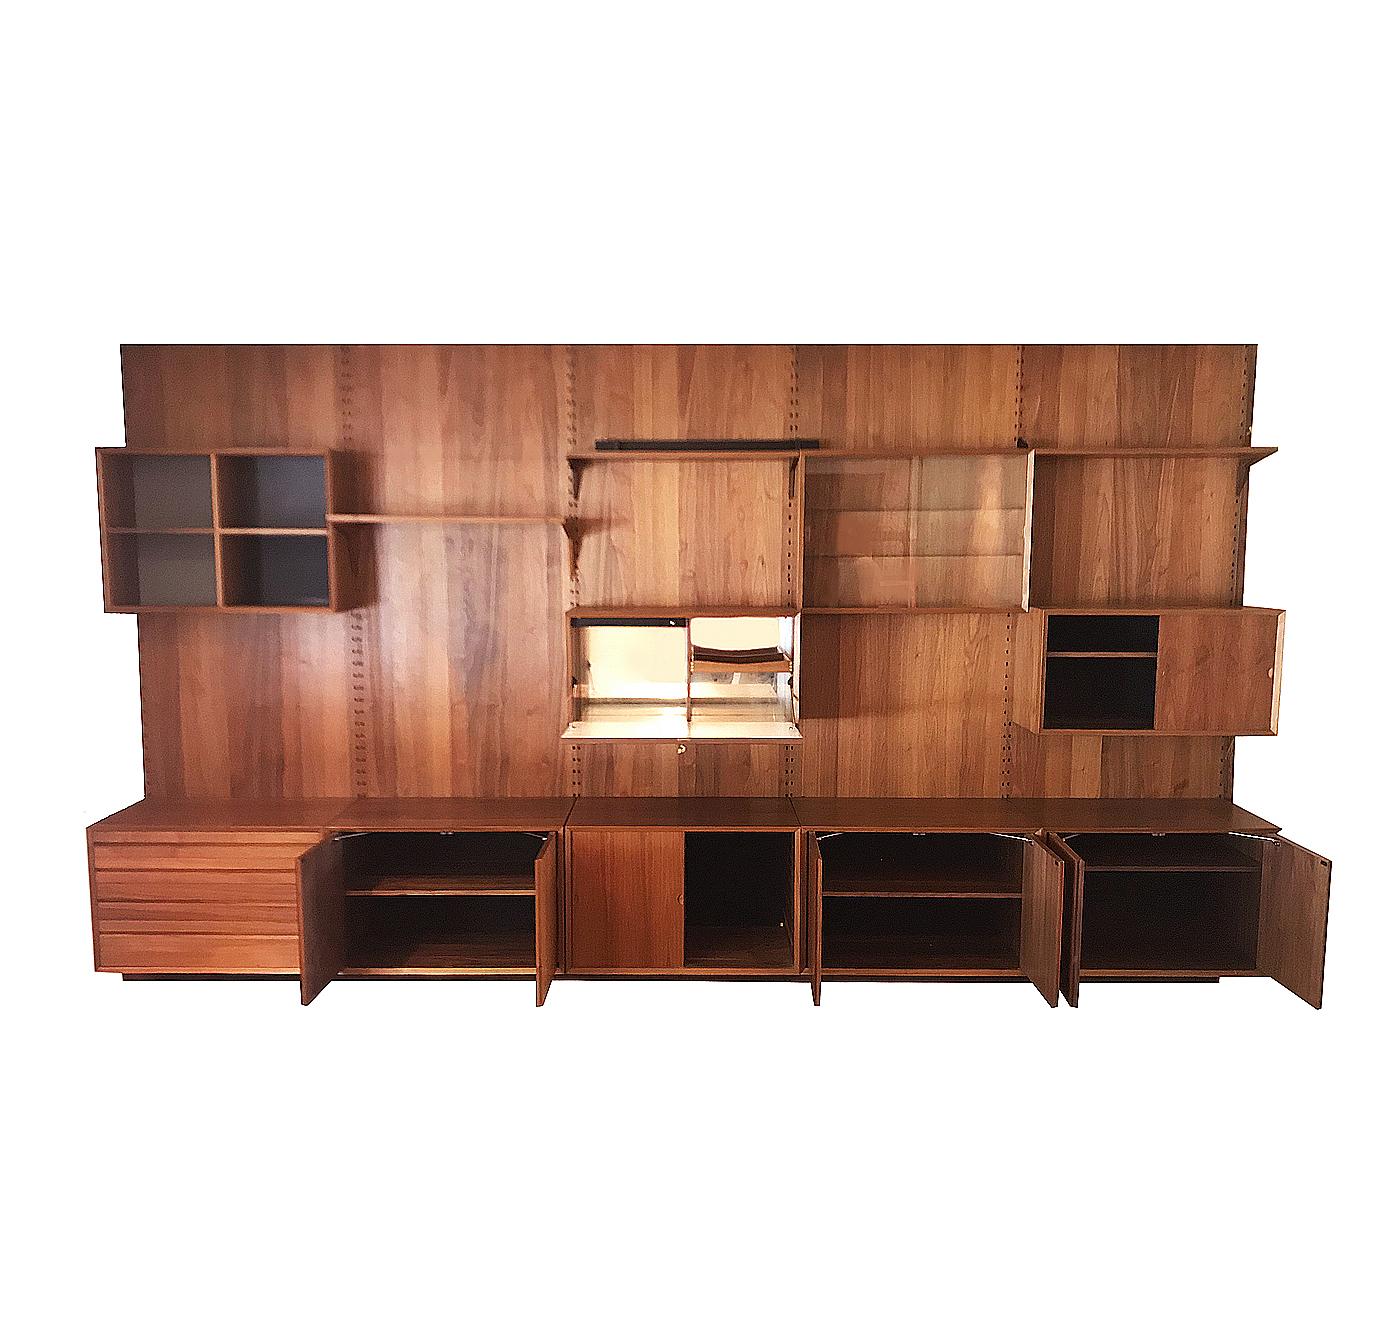 Here we have a large wall unit designed by Poul Cadovius for Cado Systems. This unit consists of five wall mounting pieces with many cabinet components and shelves as shown. It is completely modular and can be arranged to your liking. This was